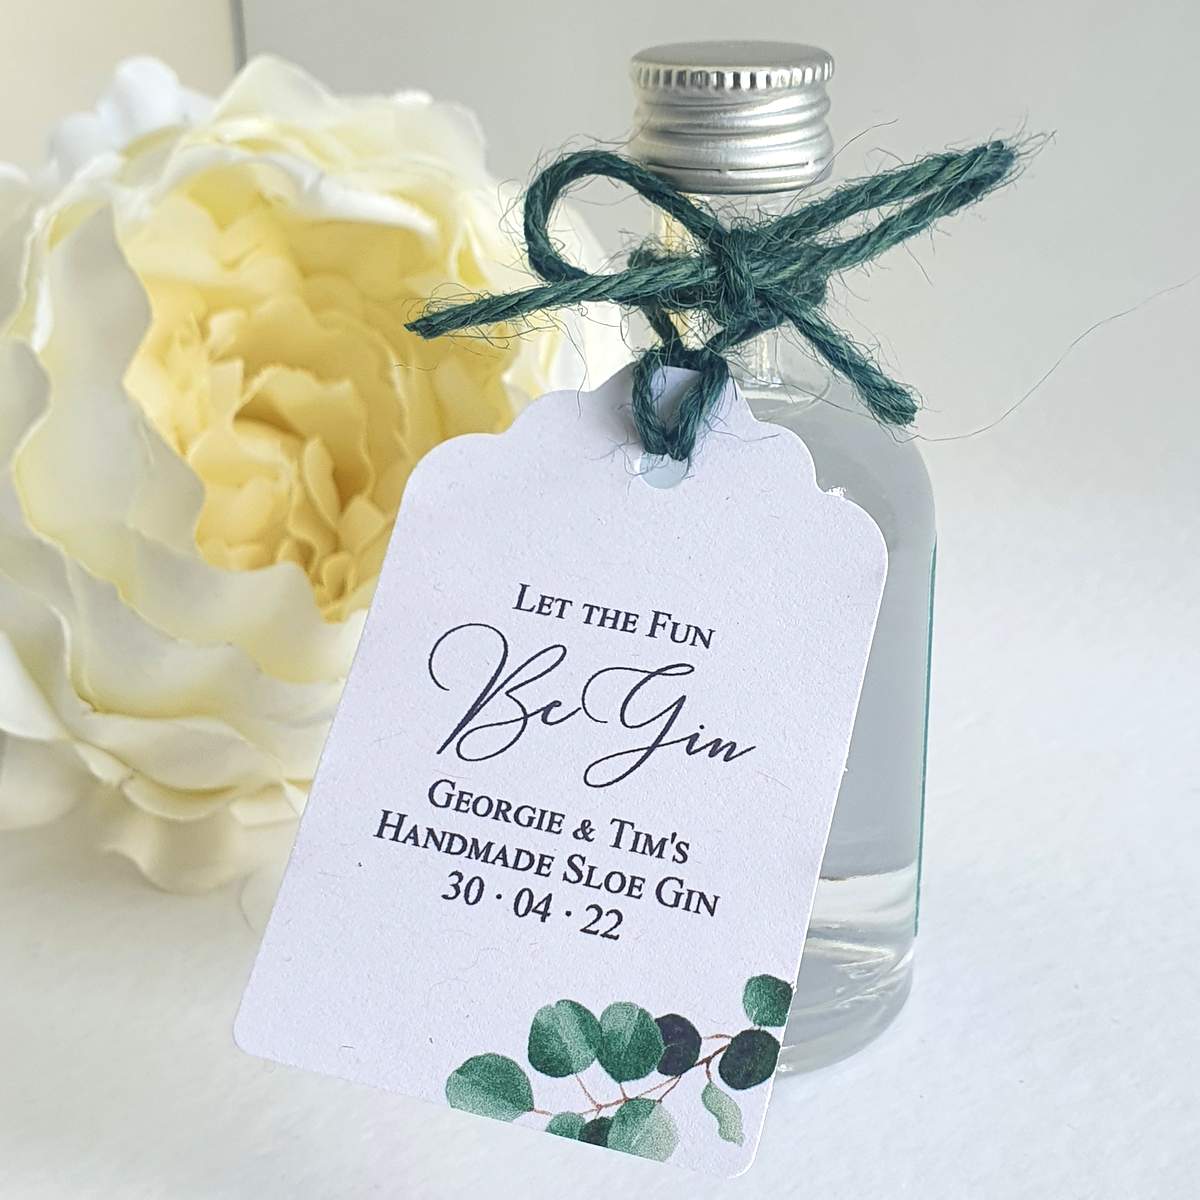 a wedding favour miniature drink bottle with a tag saying let the fun begin